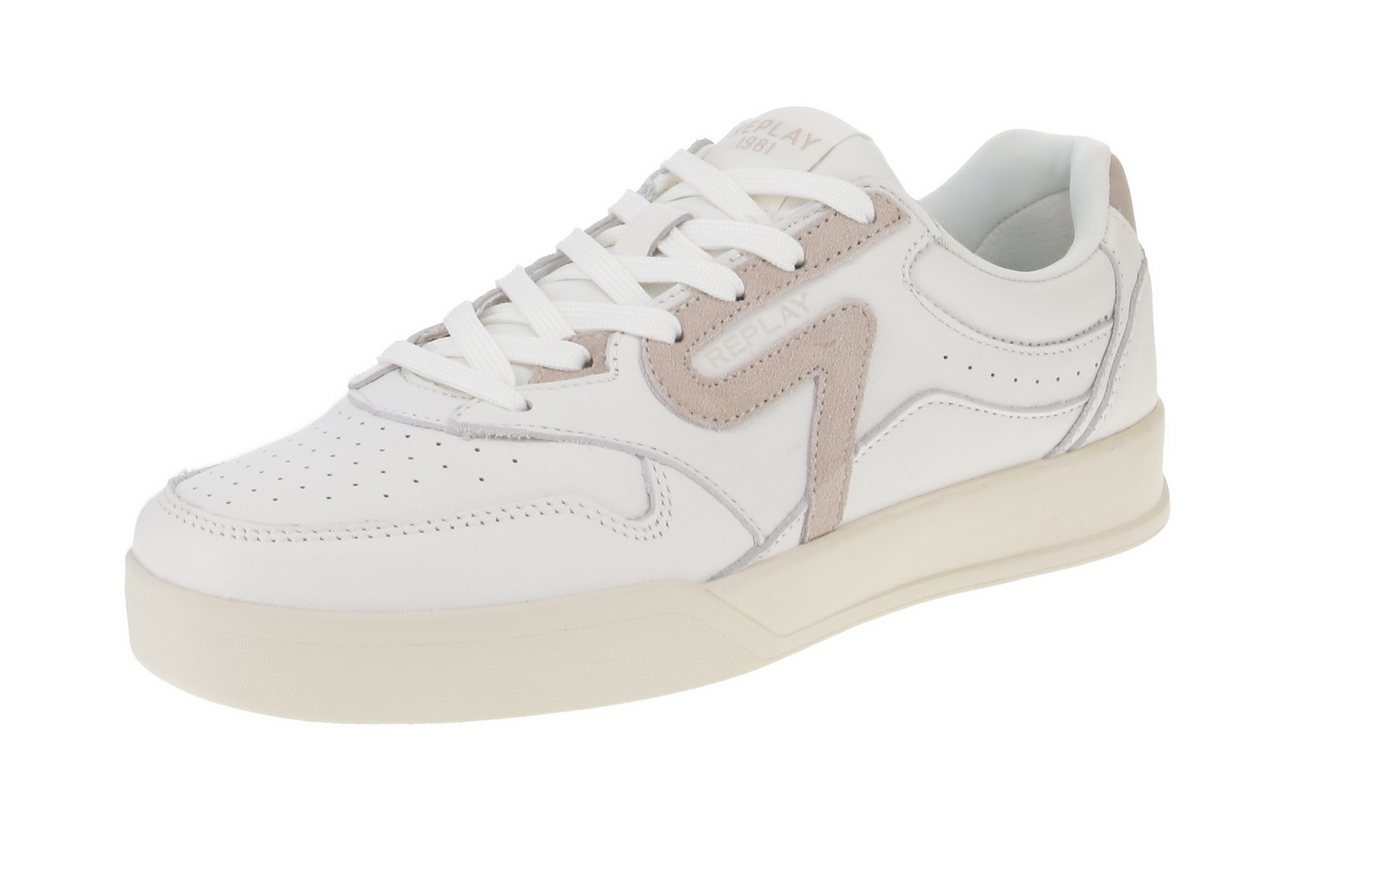 Replay GMZ5N C0001L-041OffWhite-41 Sneaker von Replay